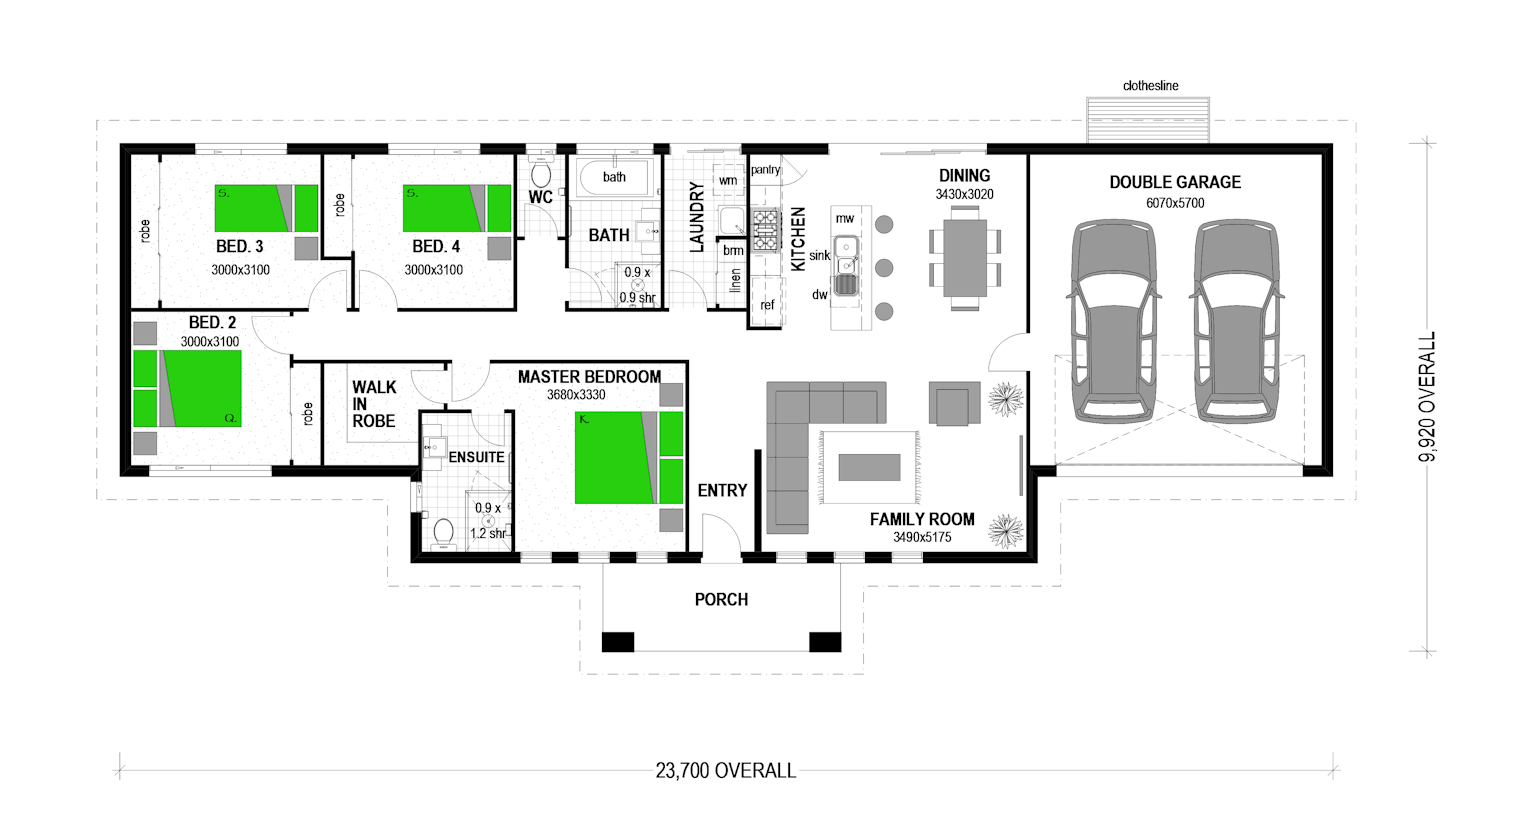 Check Out Our Fully Loaded Inclusions! floor plan